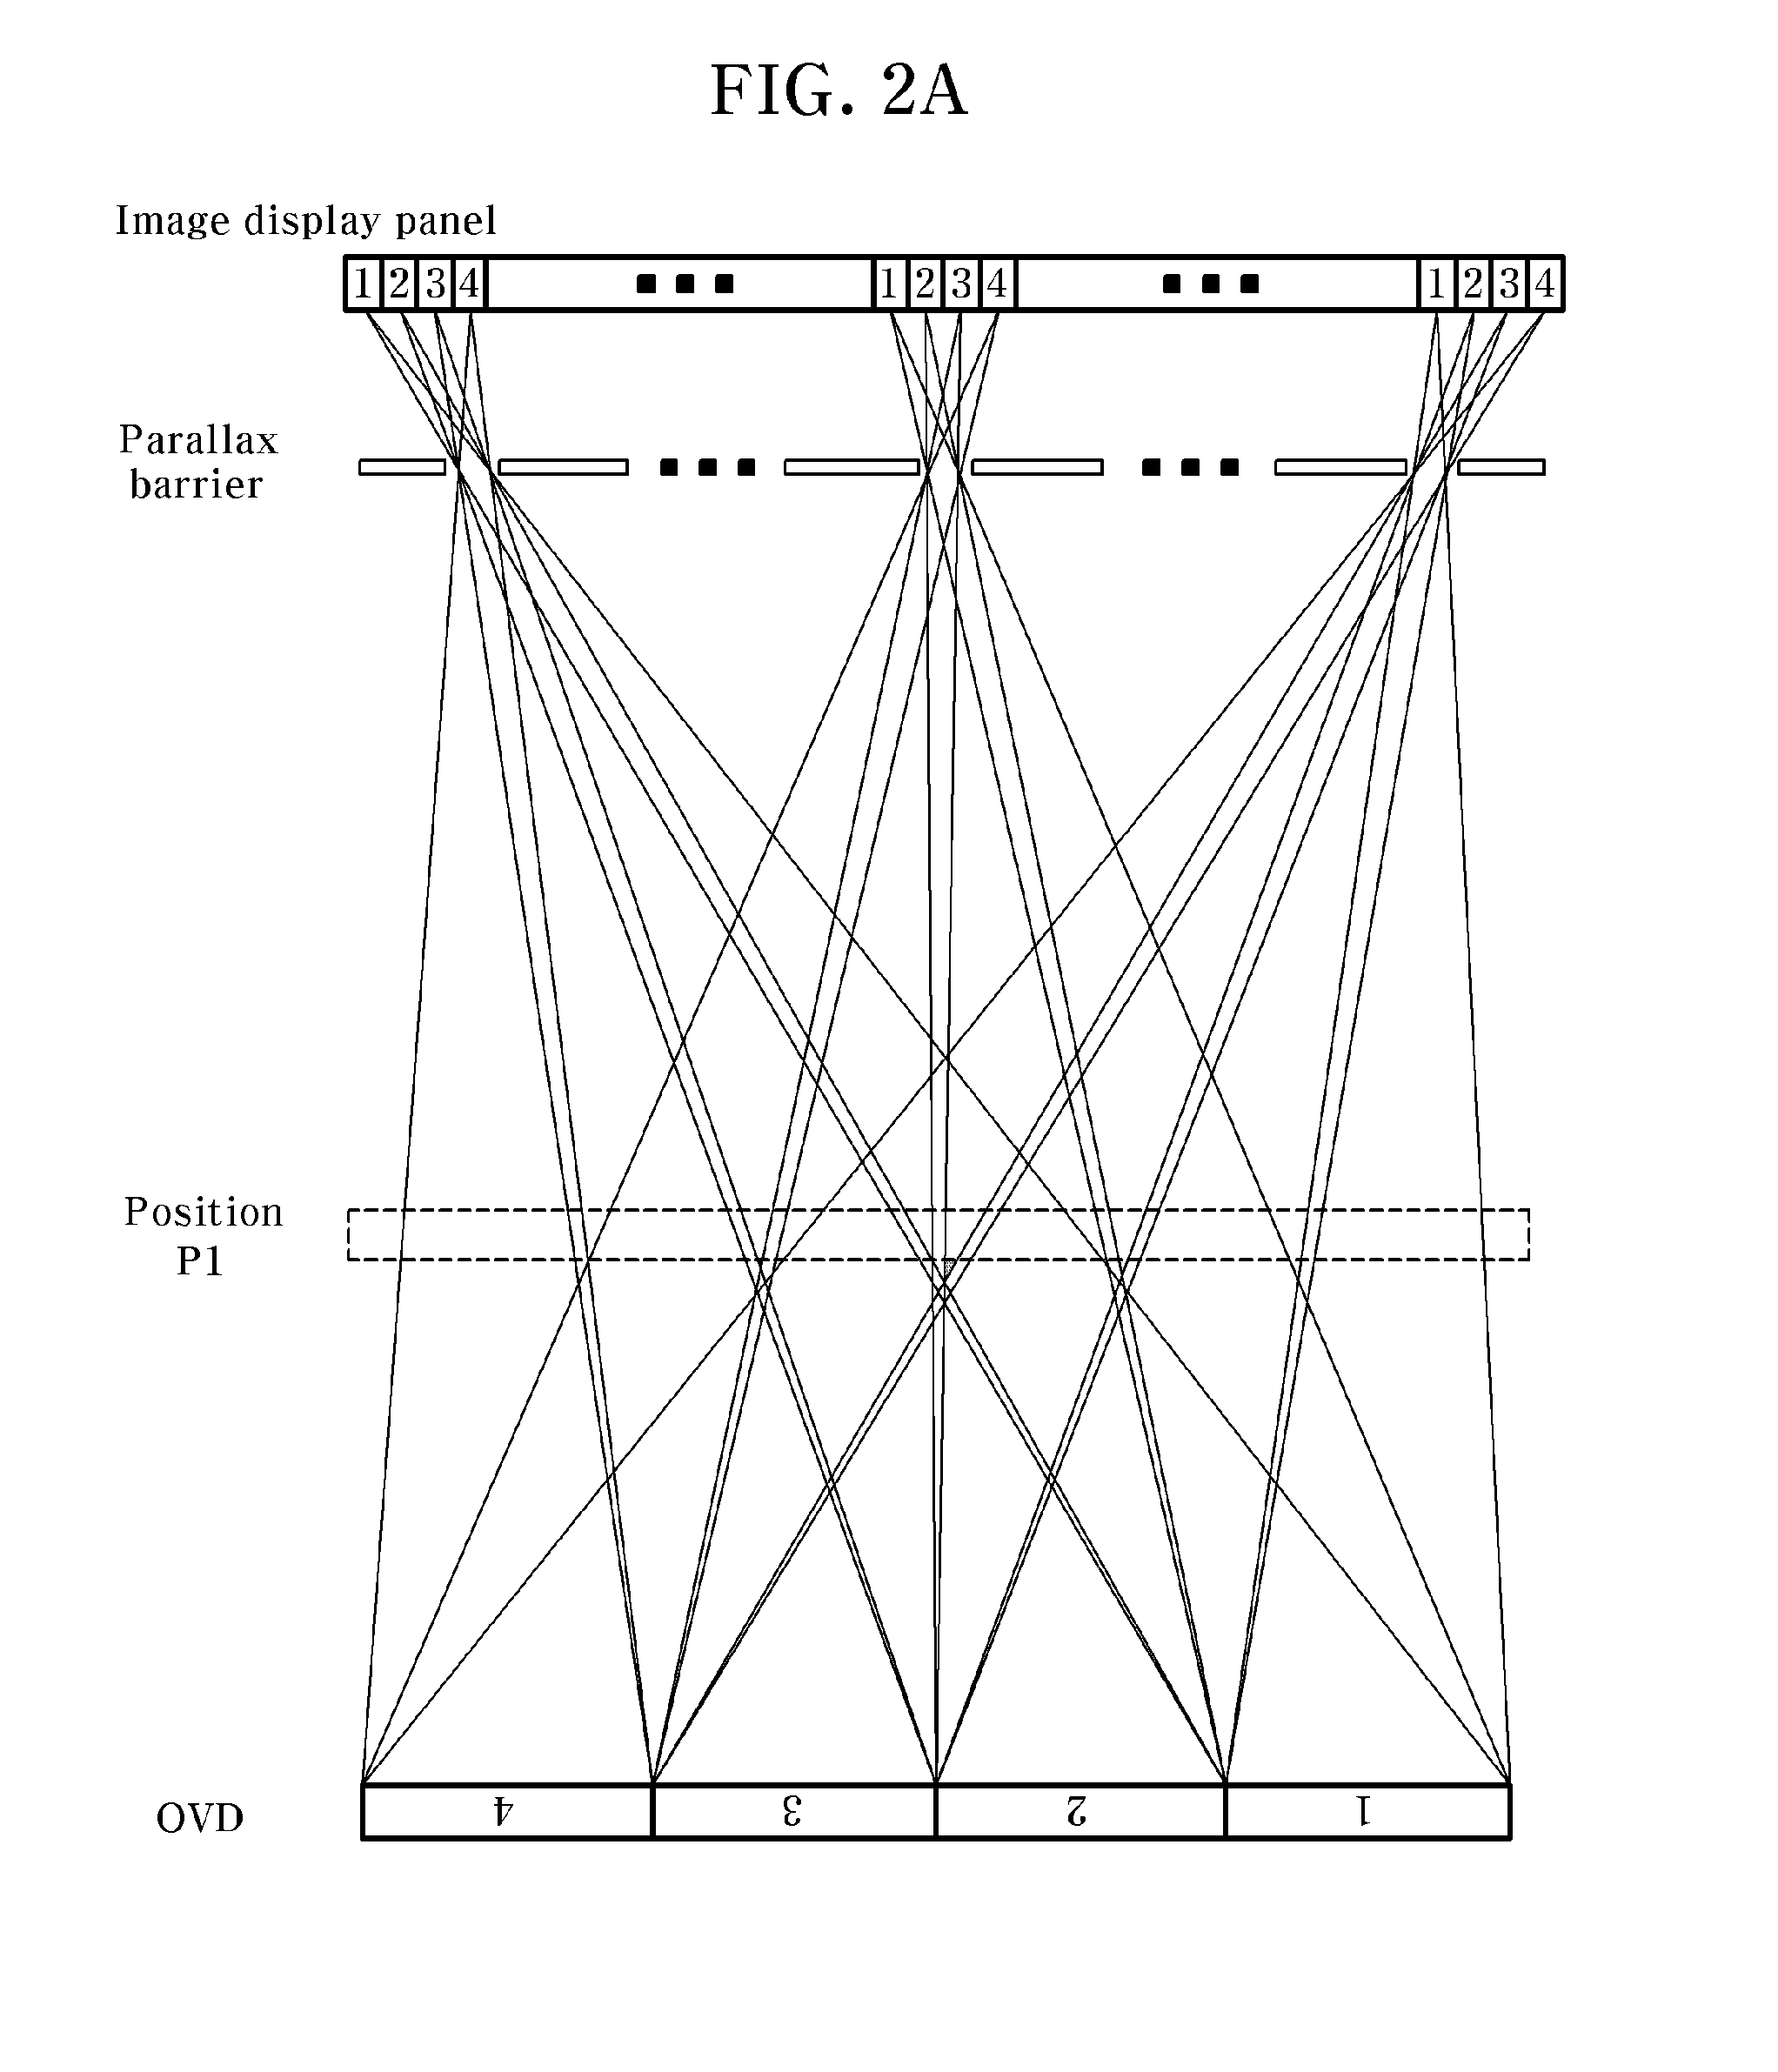 Autostereoscopic three-dimensional image display device using time division